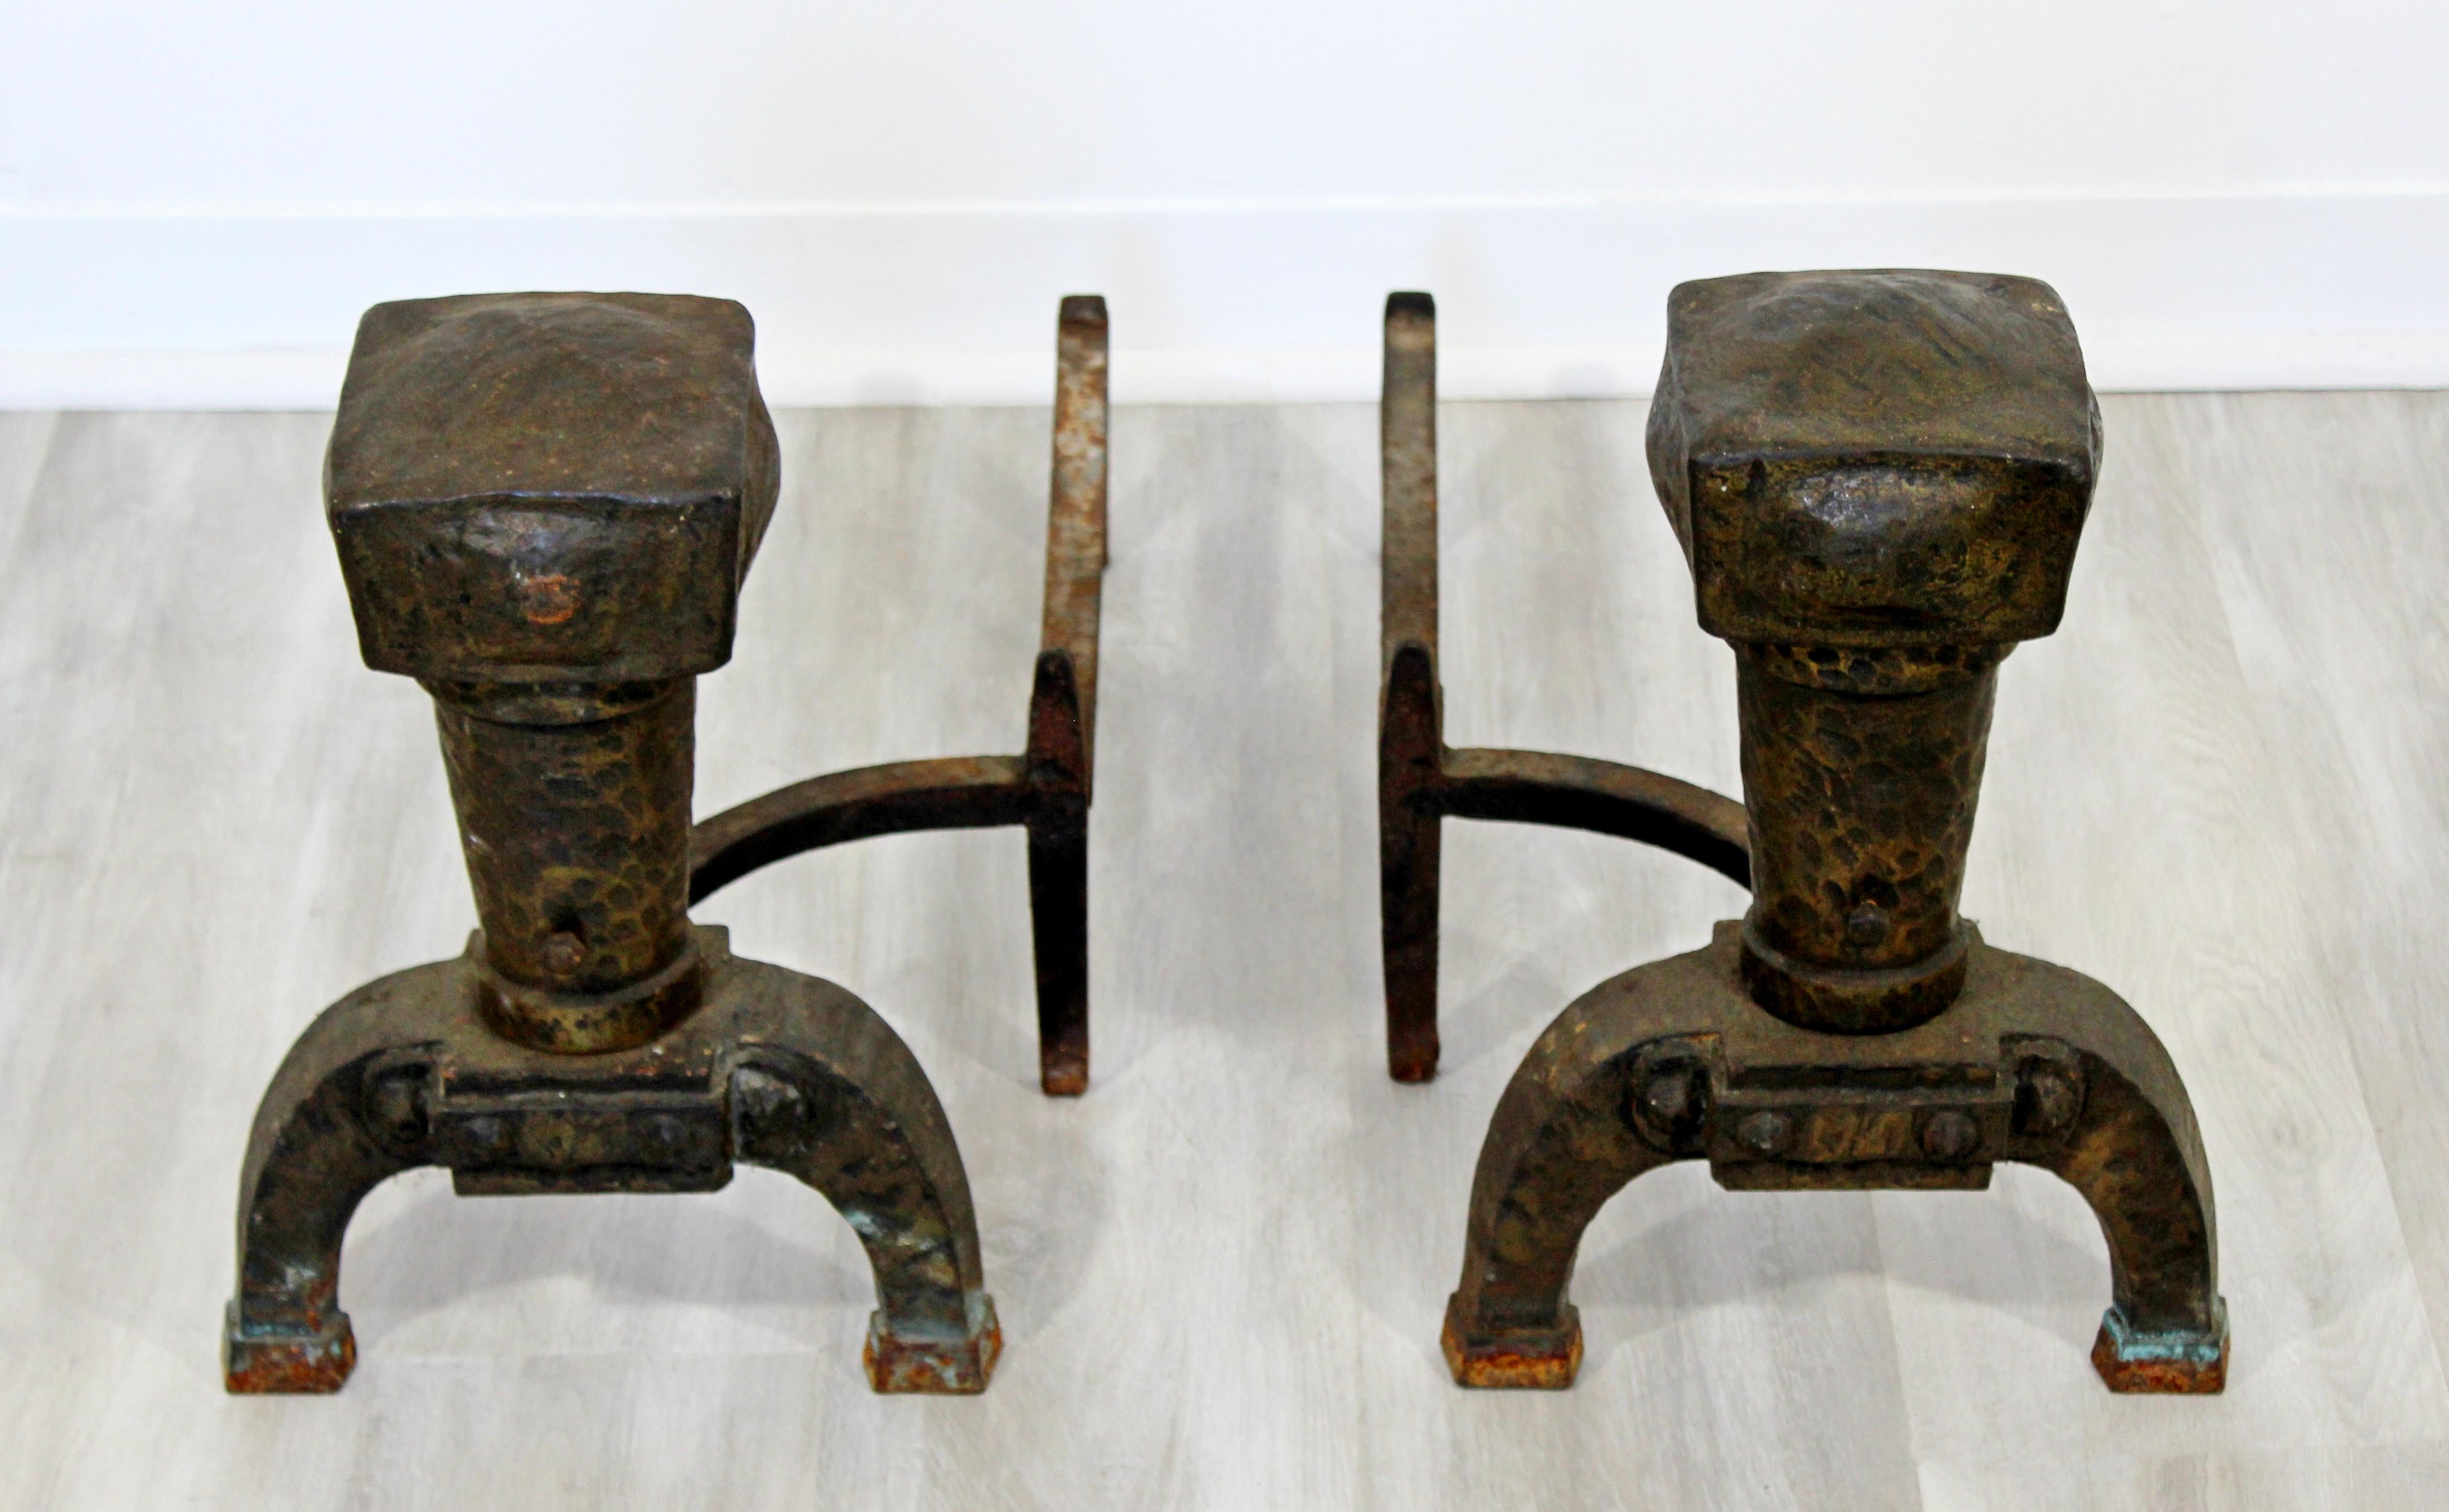 For your consideration is a magnificent pair of antique, Brutalist, iron andirons. In excellent condition, with age appropriate wear and patina. The dimensions of each are 12